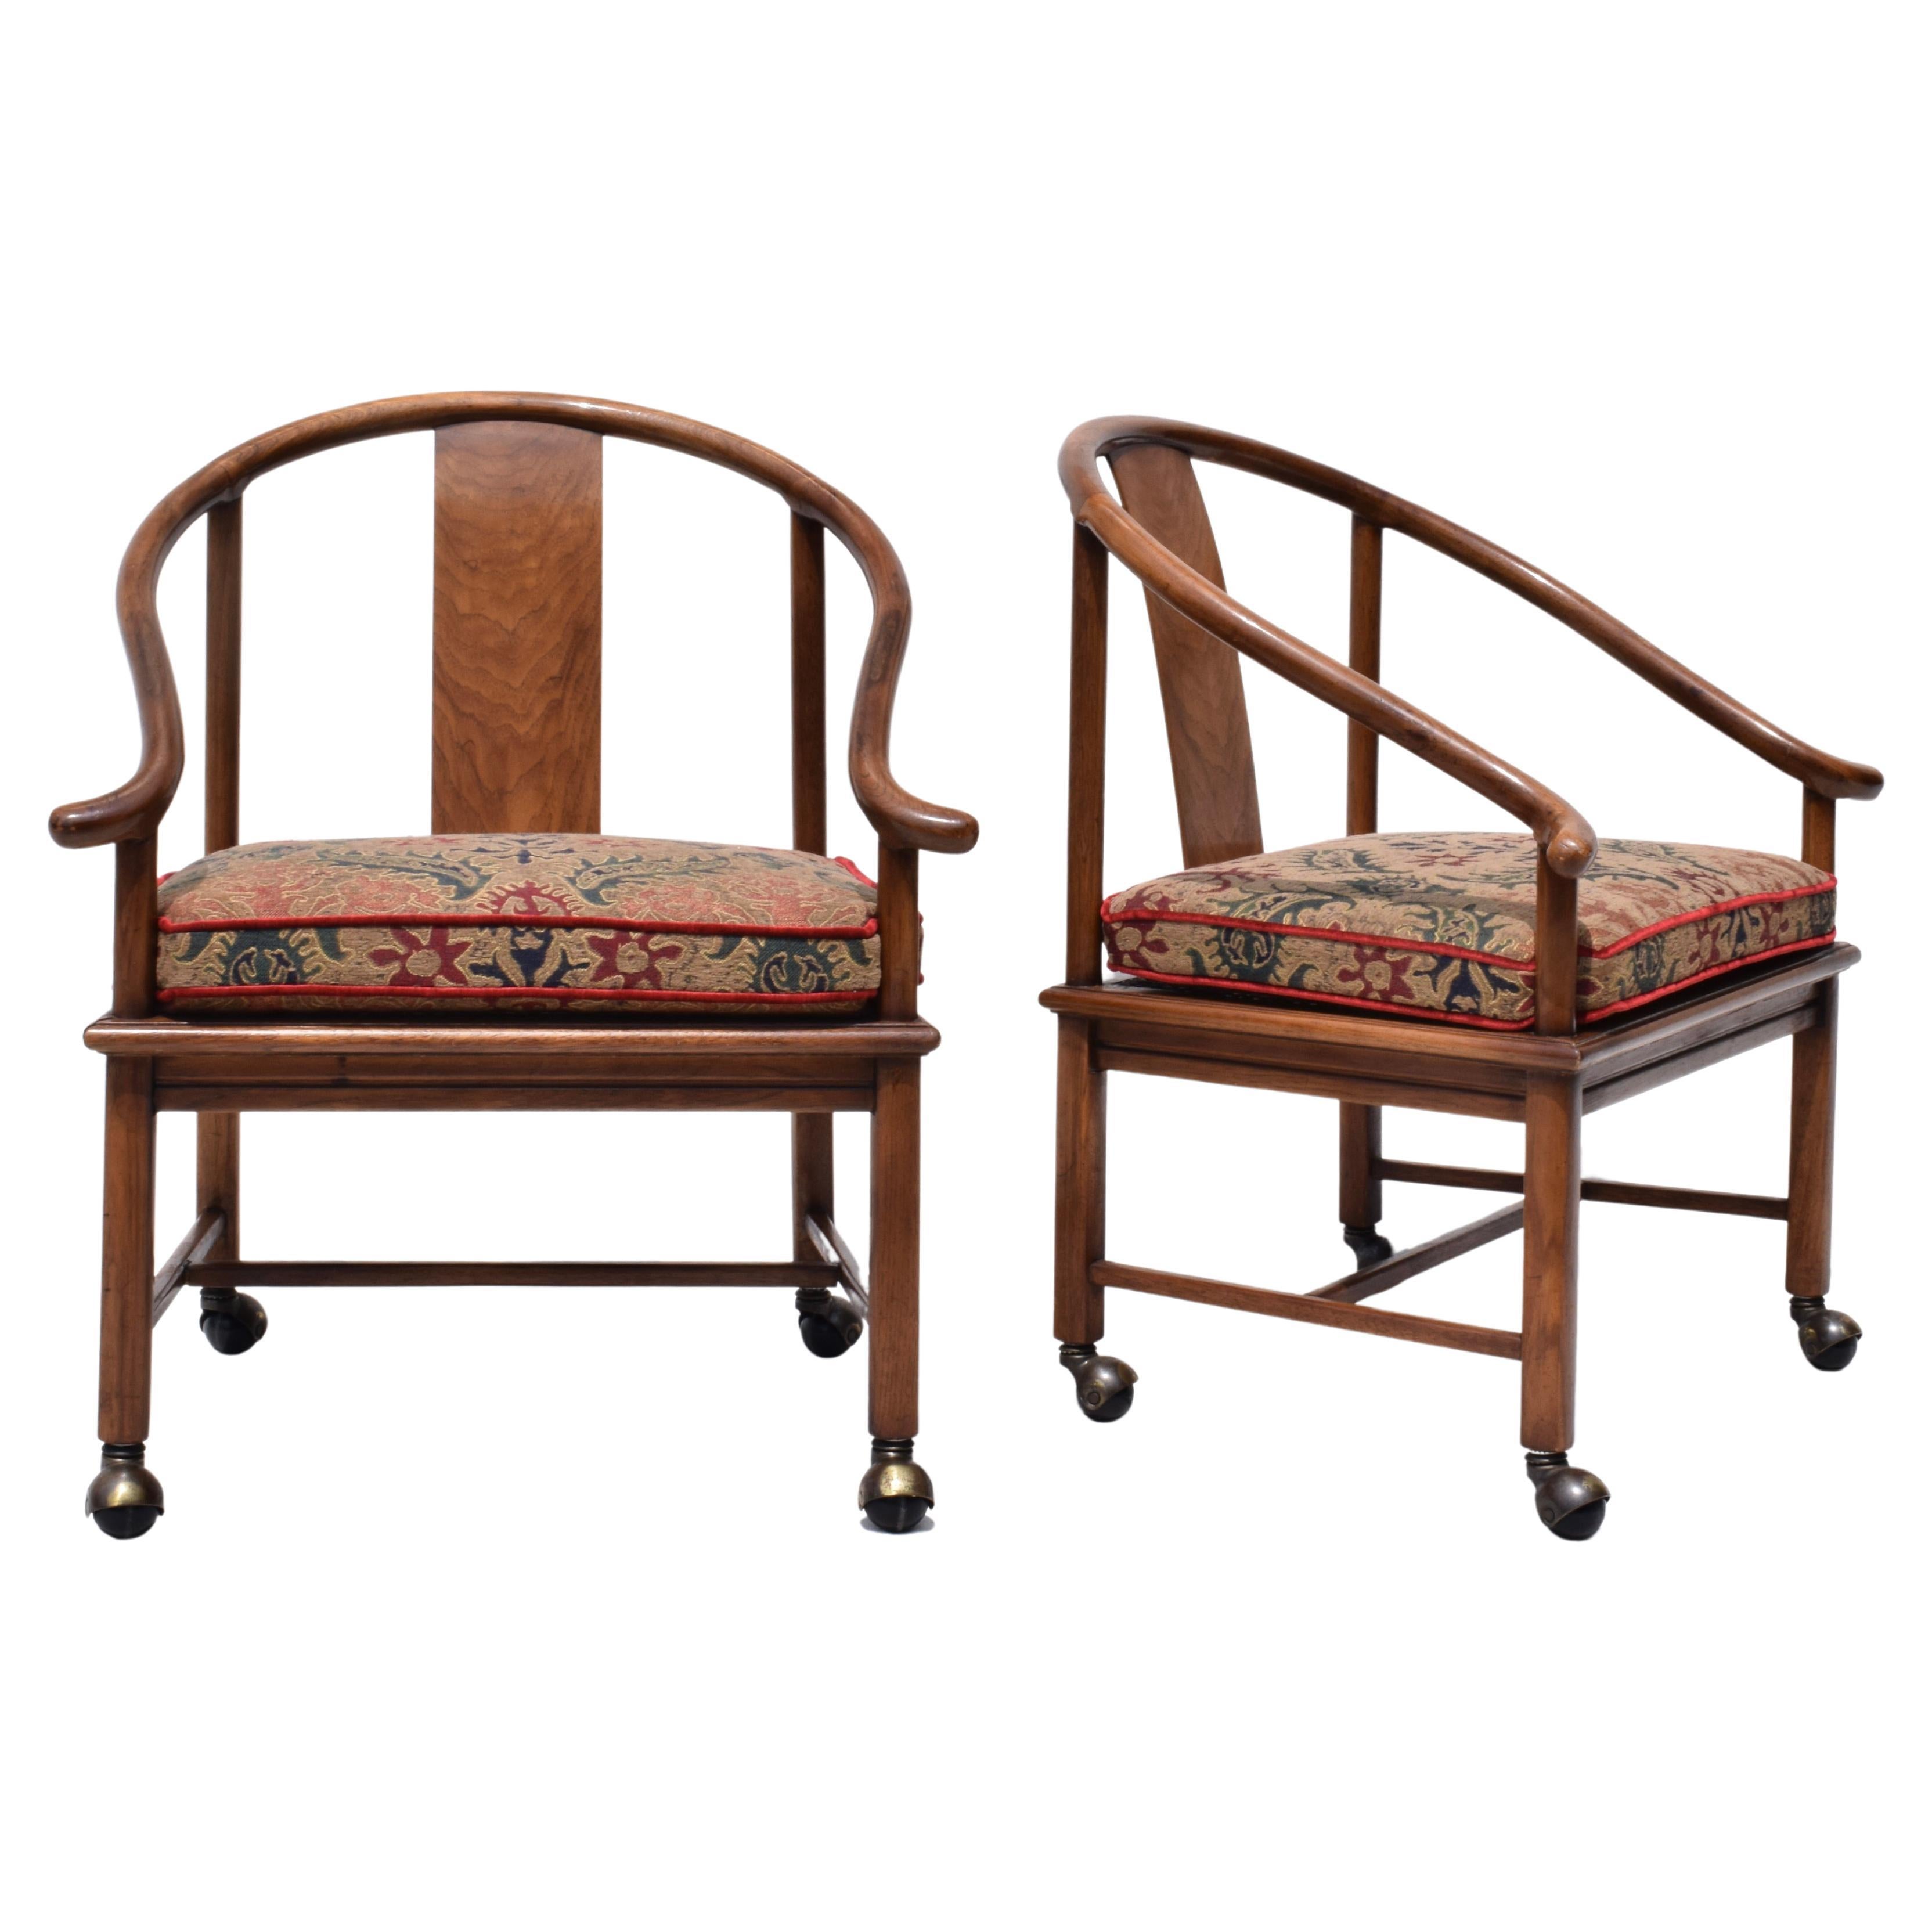 20th c. Modern Ming Horseshoe Chairs With Caned Seats Custom Cushions  For Sale